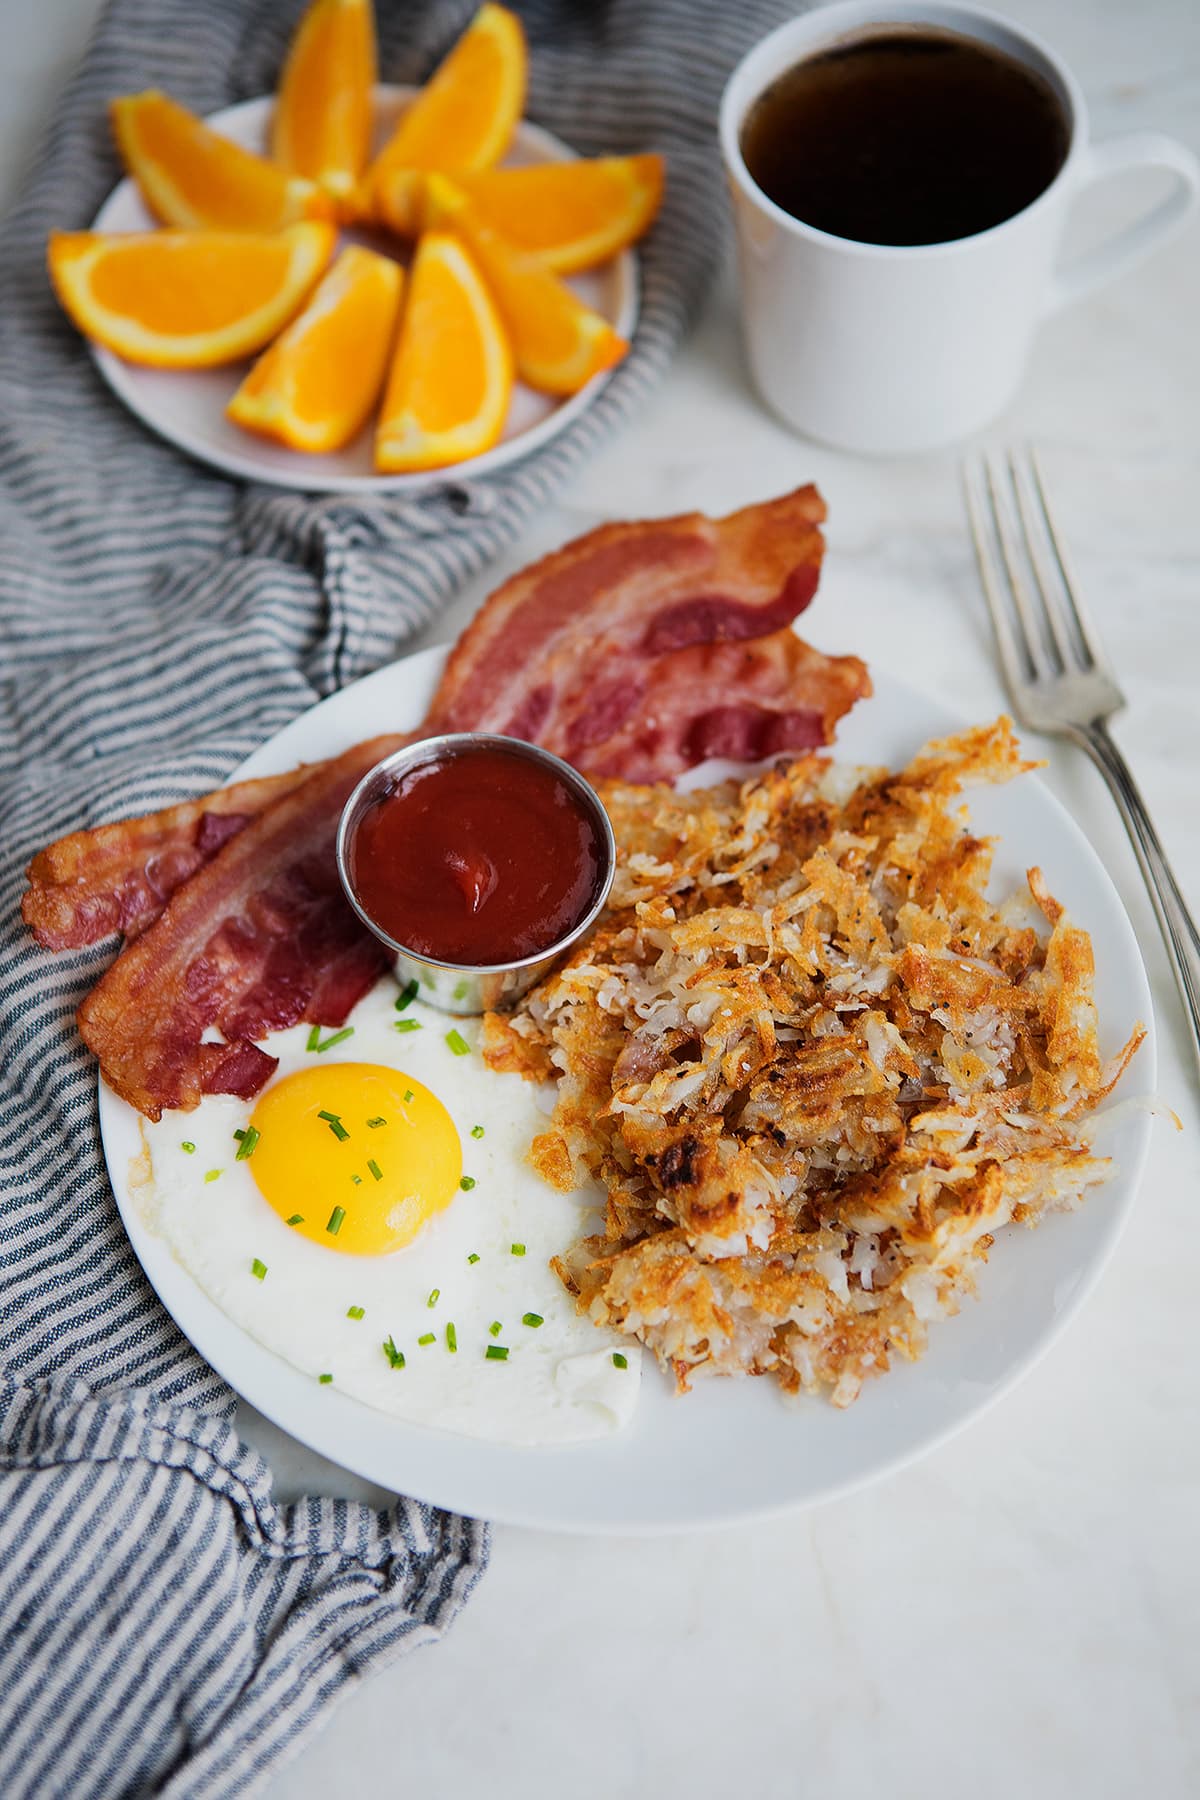 How to Make Hash Browns  Favorite Family Recipes